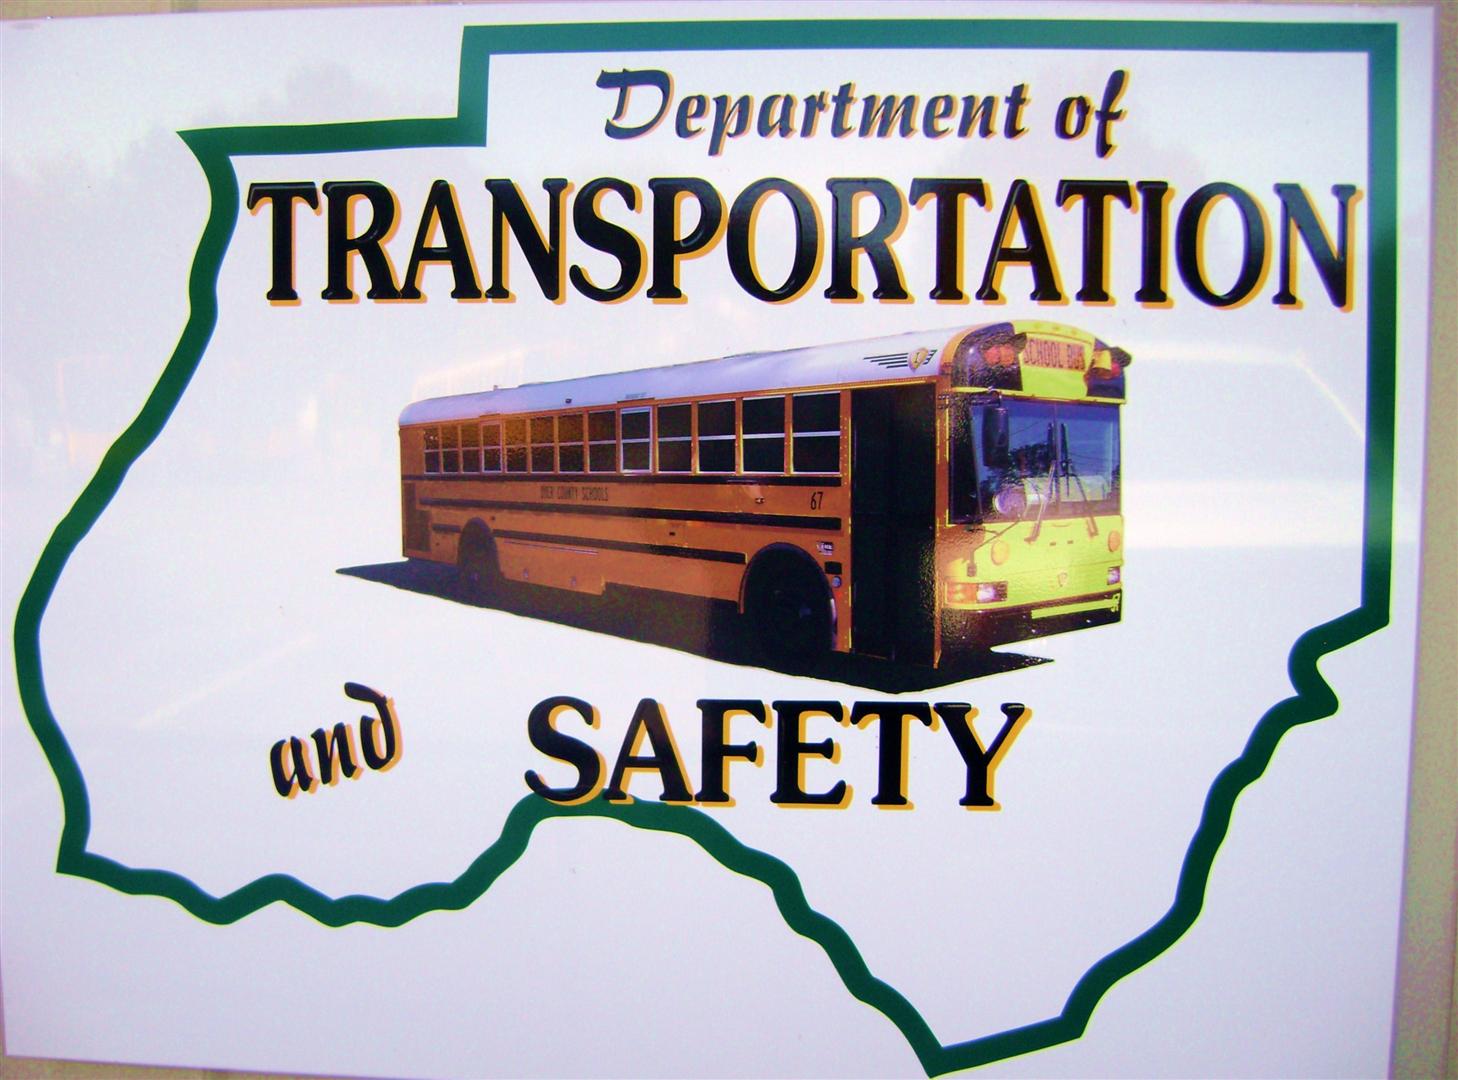 Department of Transportation and safety